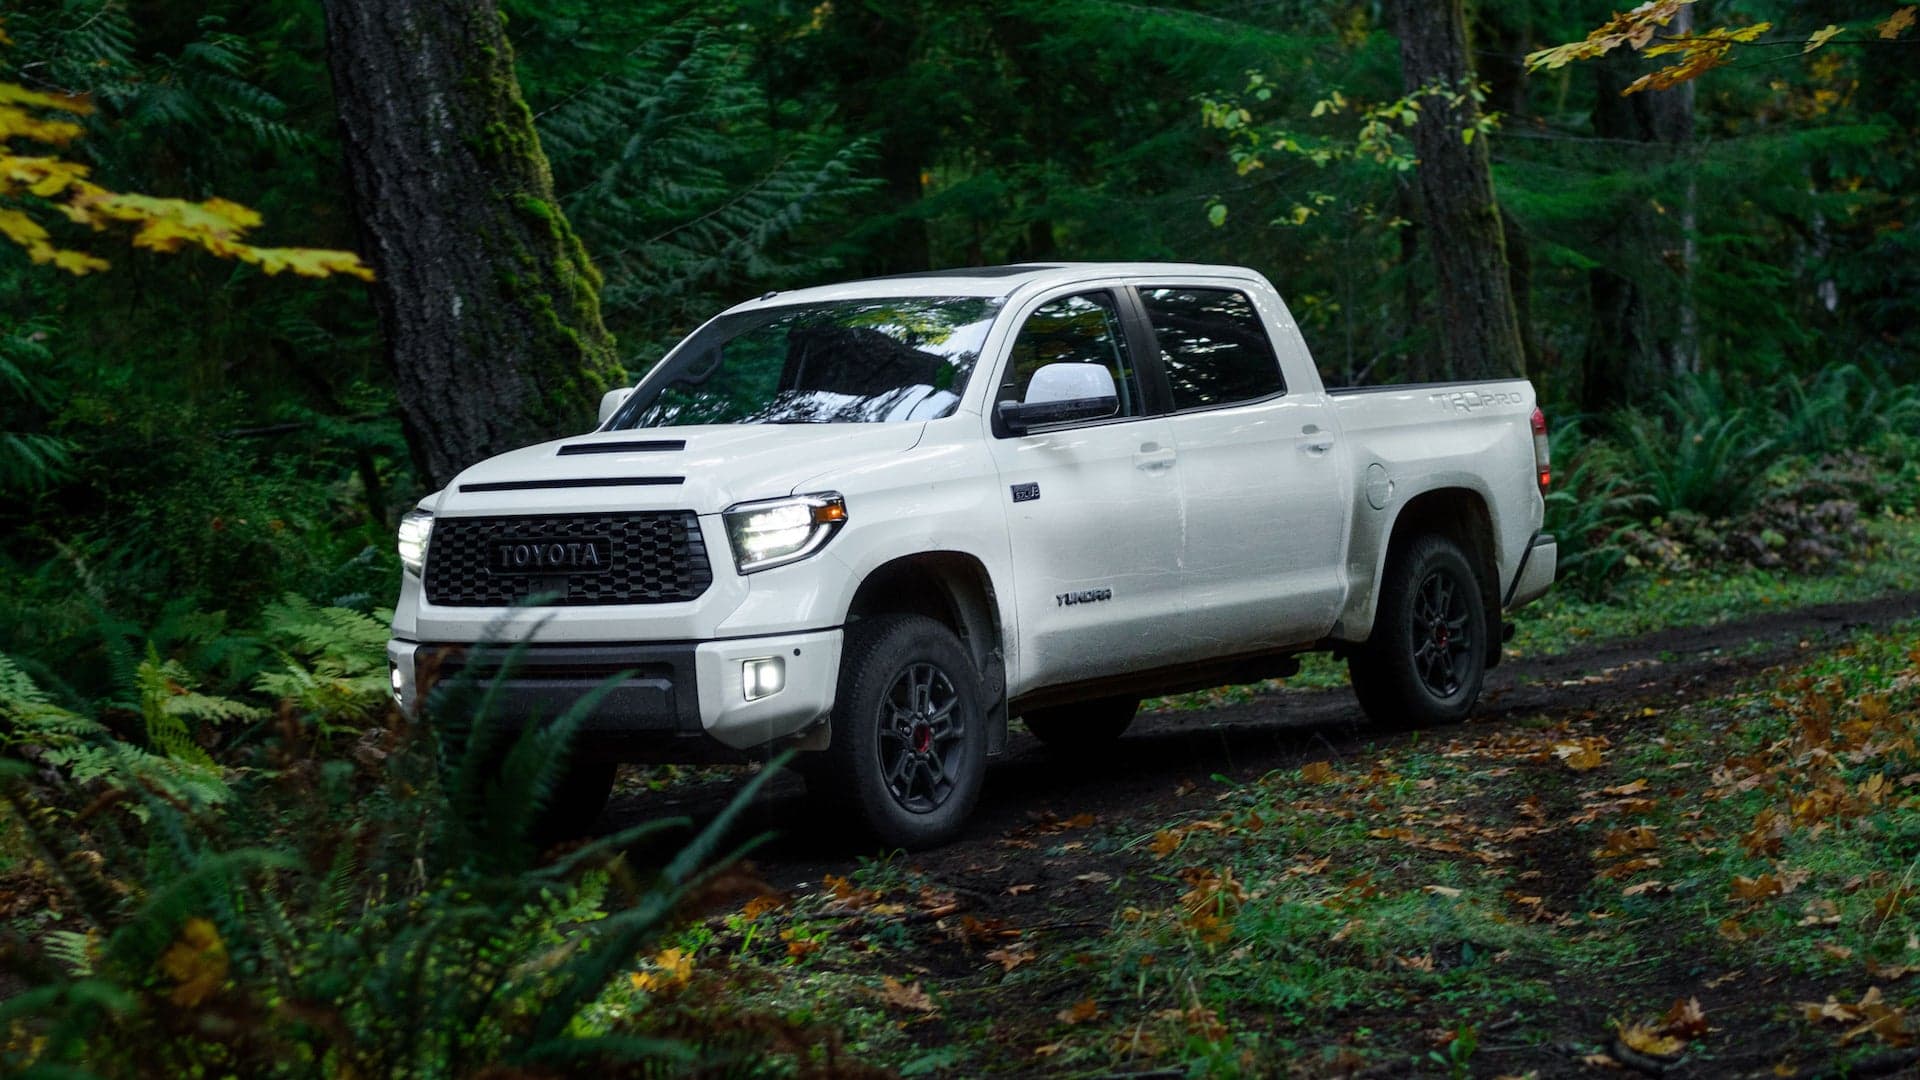 Toyota Patent Suggests a High-Compression Diesel Truck Engine May Be in the Works